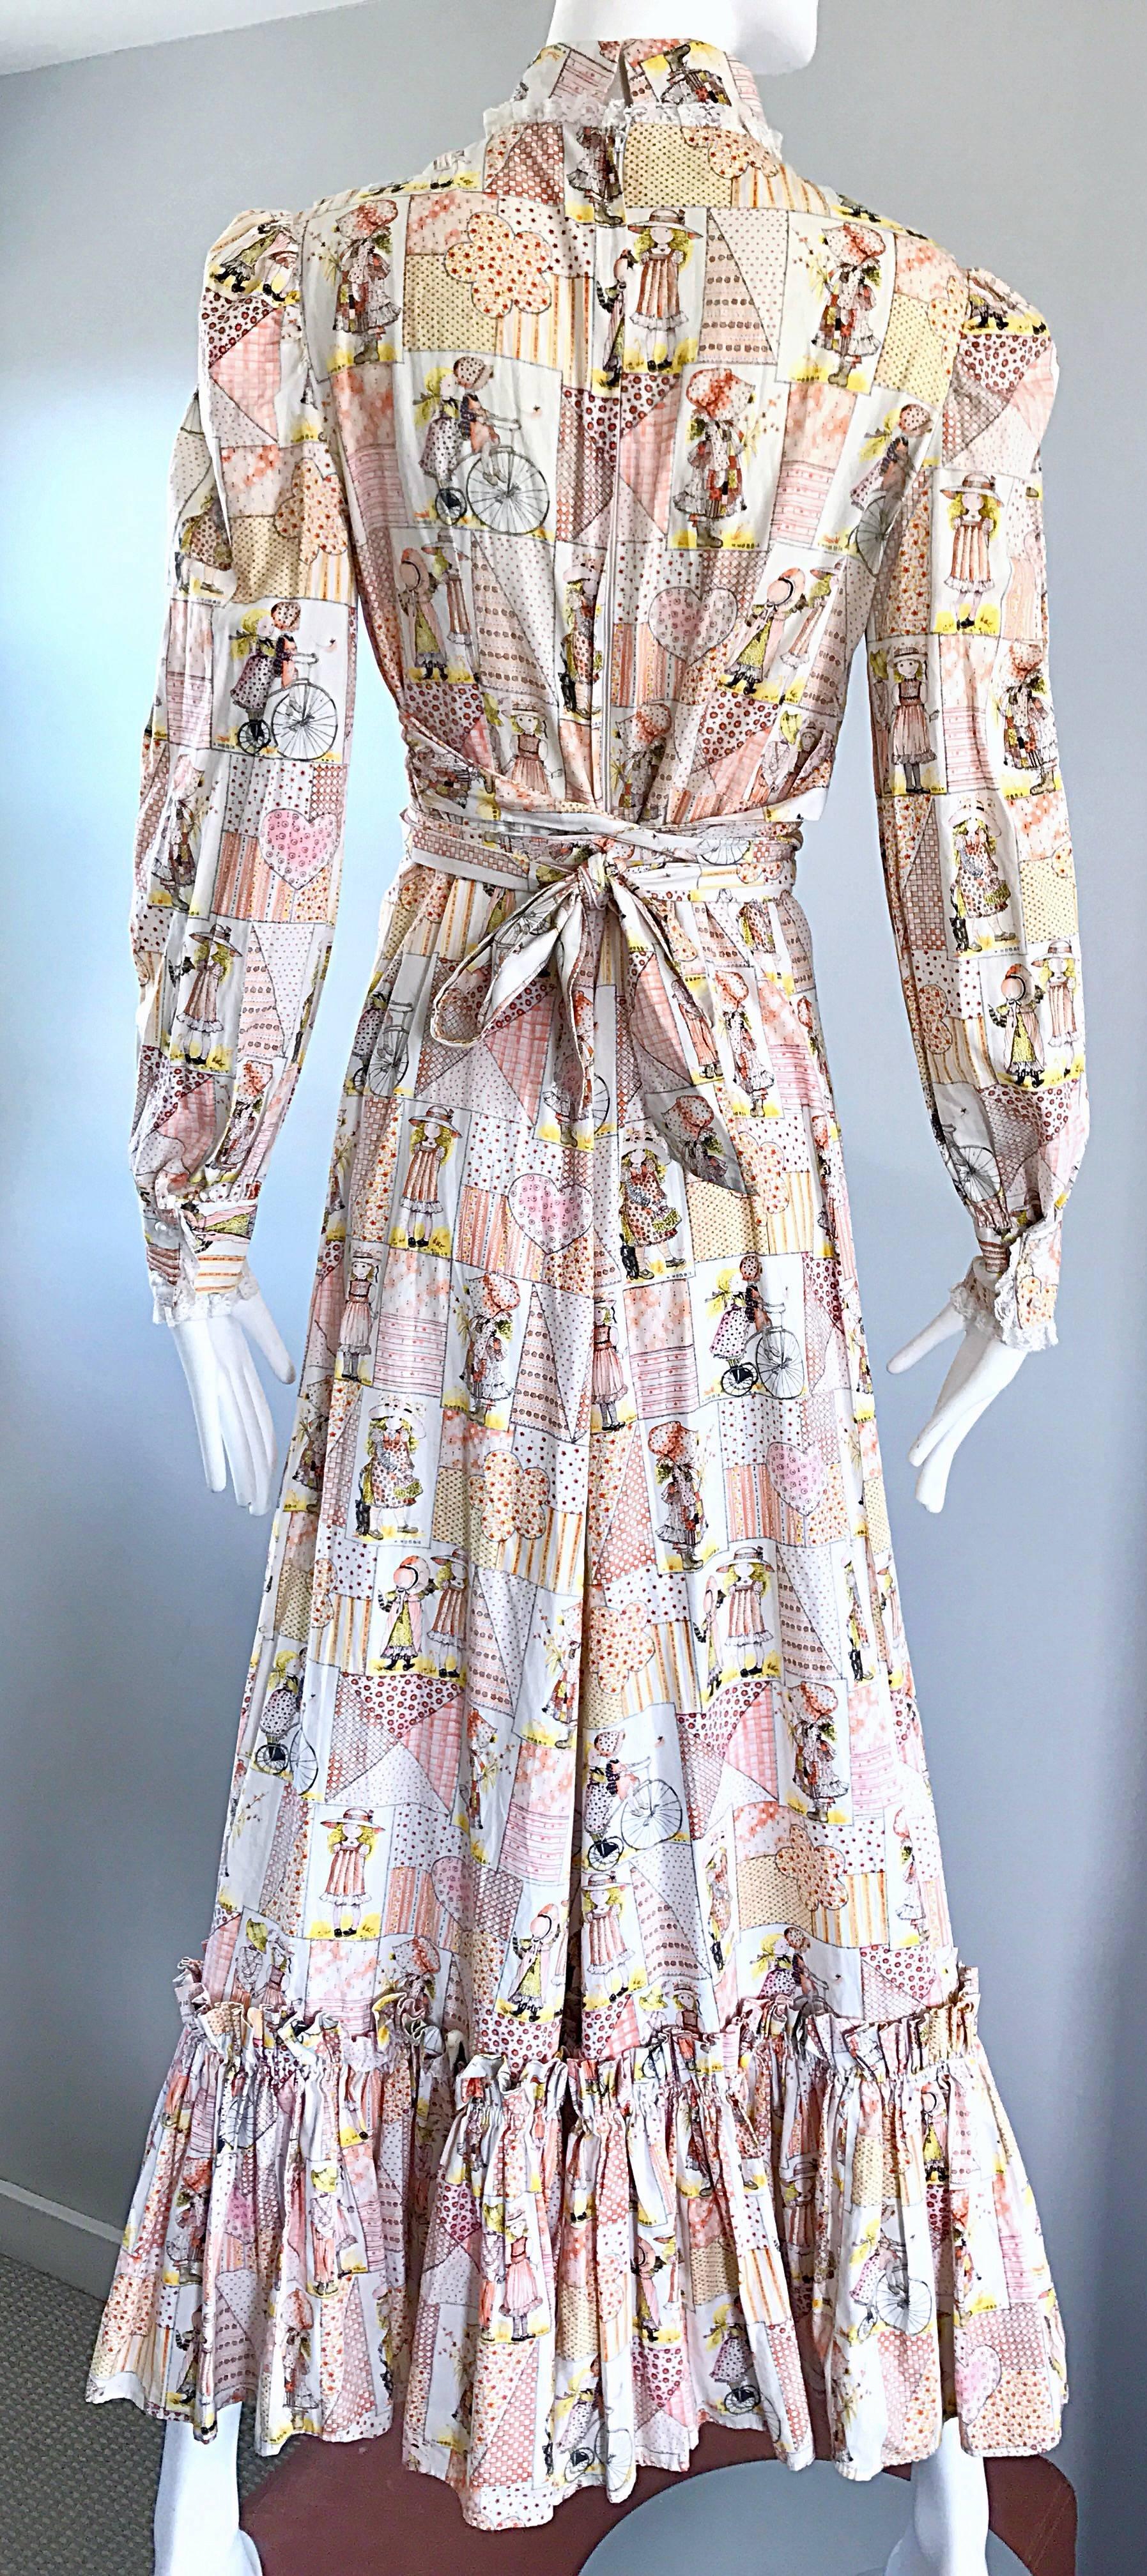 Women's 1970s Holly Hobbie Novelty Print Victorian Inspired Cotton Vintage Maxi Dress